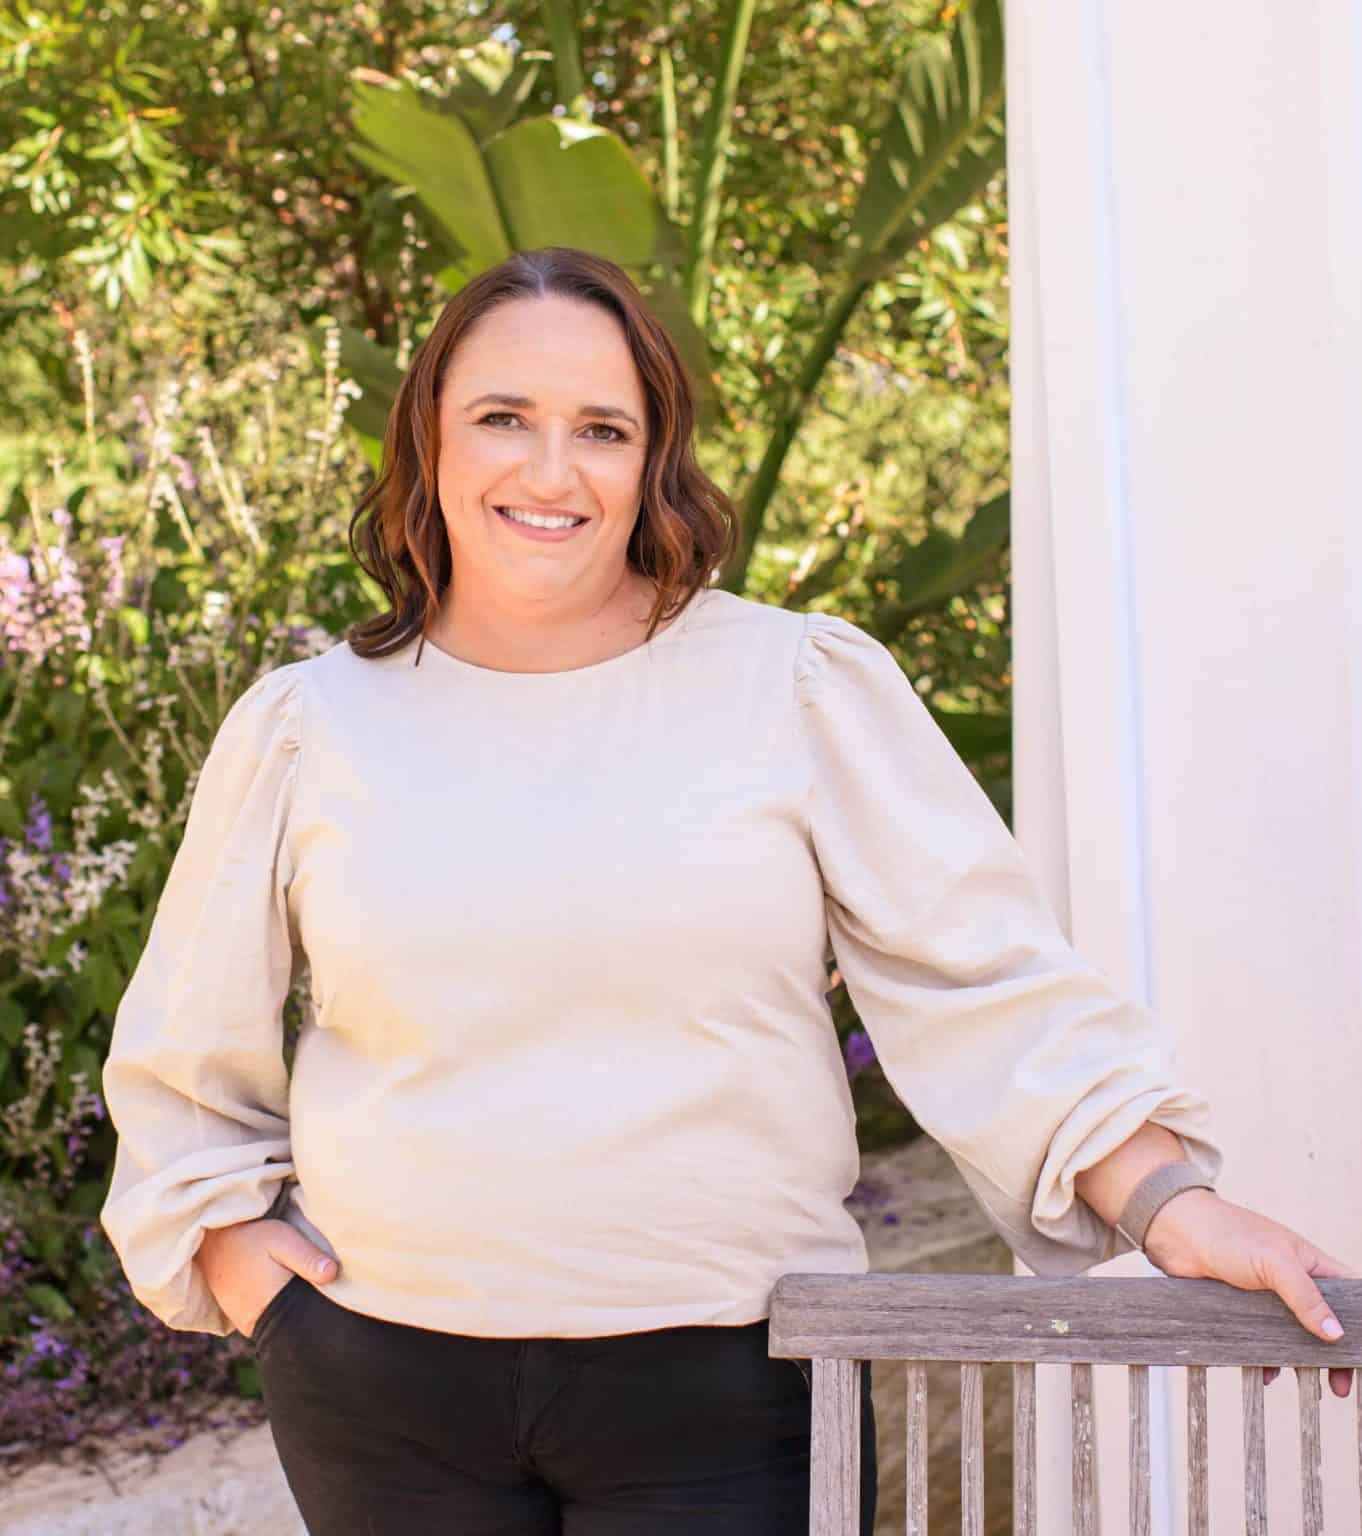 Michelle Gibbons, Clinical Psychologist in the Hawkesbury region. She is wearing a cream coloured top and black pants. She is leaning against the pillar of a wooden deck and has one hand in her pocket.